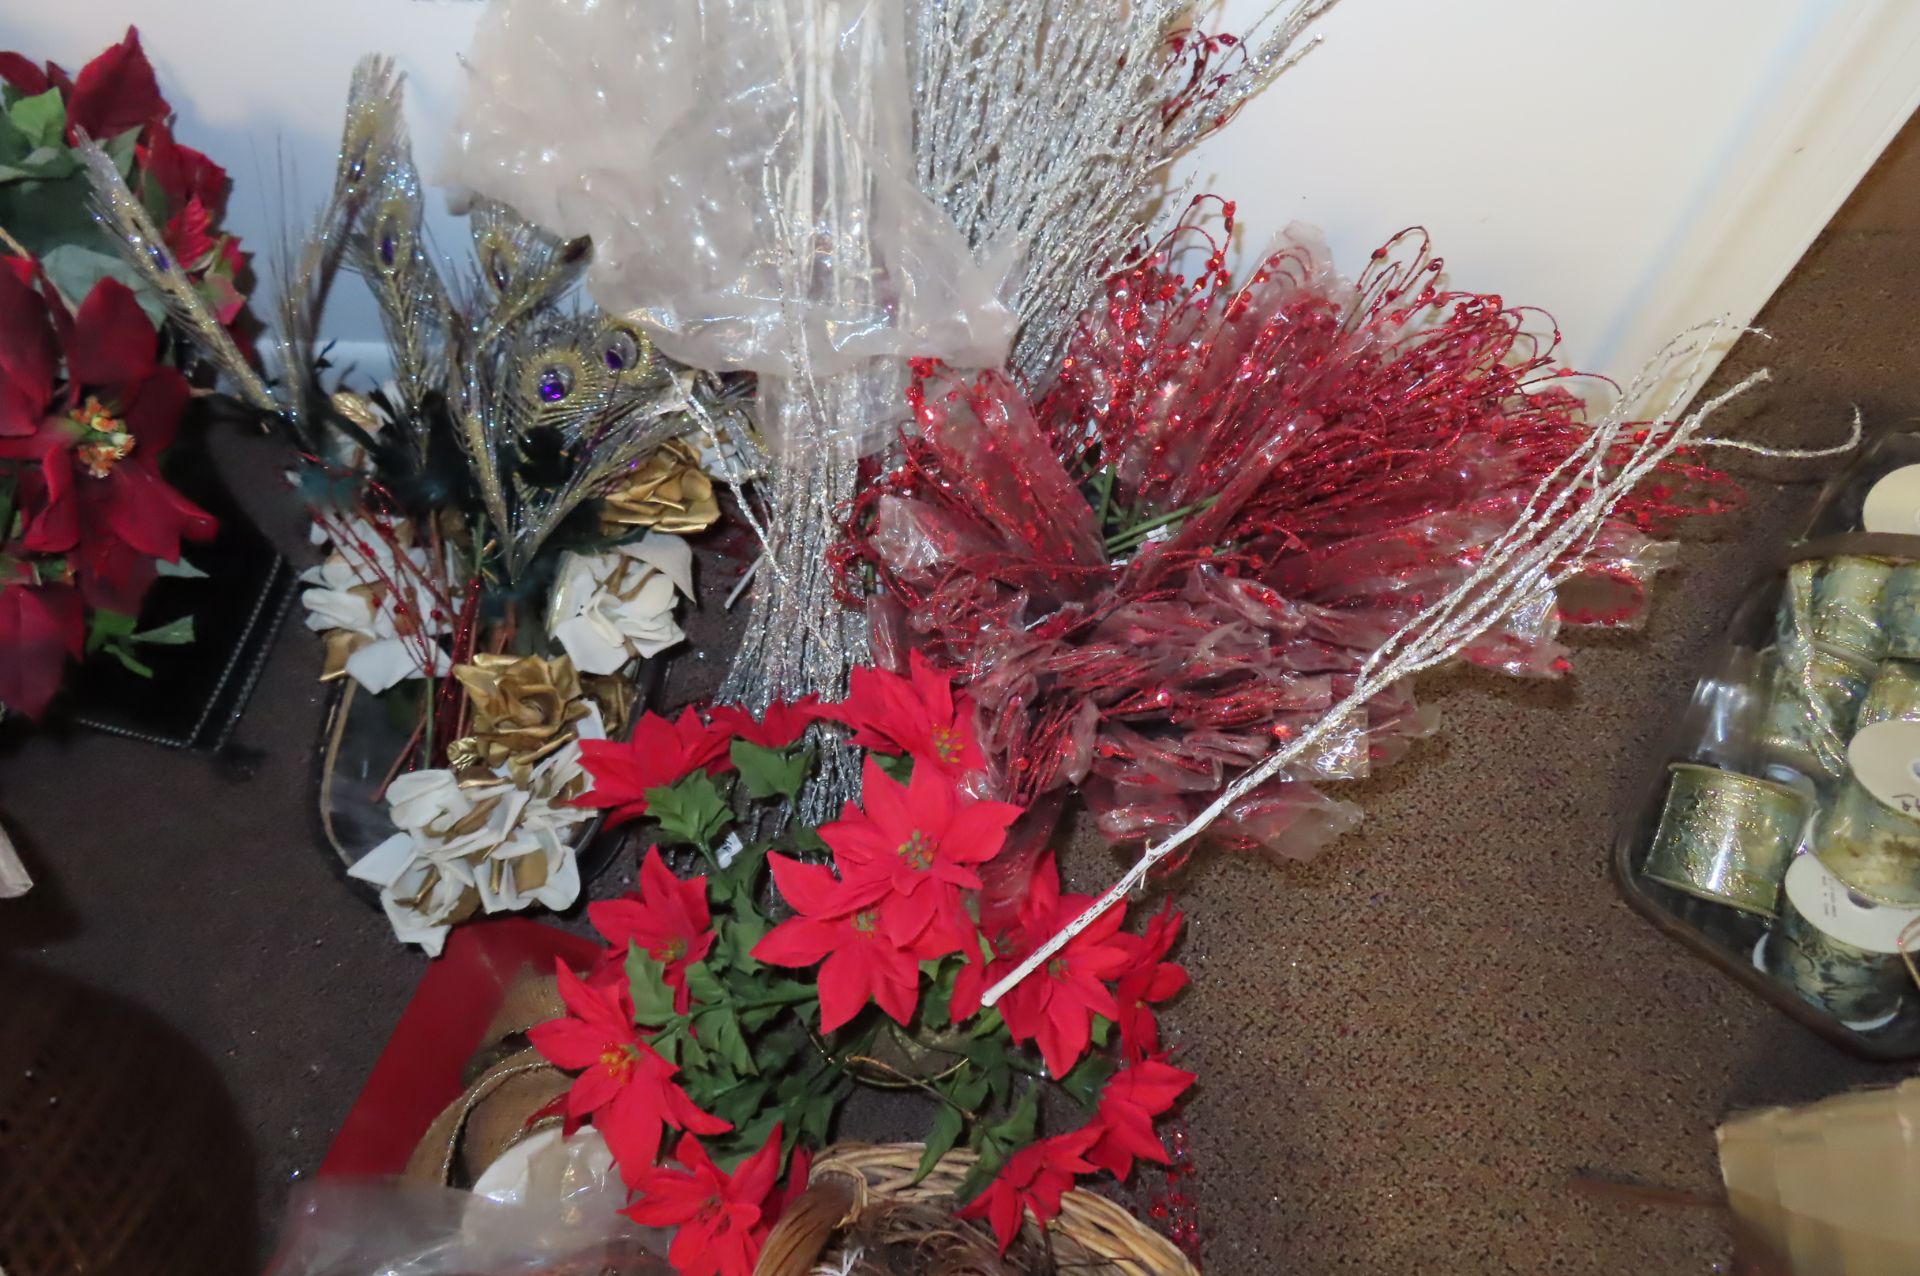 ASST. FLOWERS, JEWELED FLOWERS, ORNAMENTS, (1) ANGEL, (3) TIN AND (1) WICKER… - Image 8 of 9